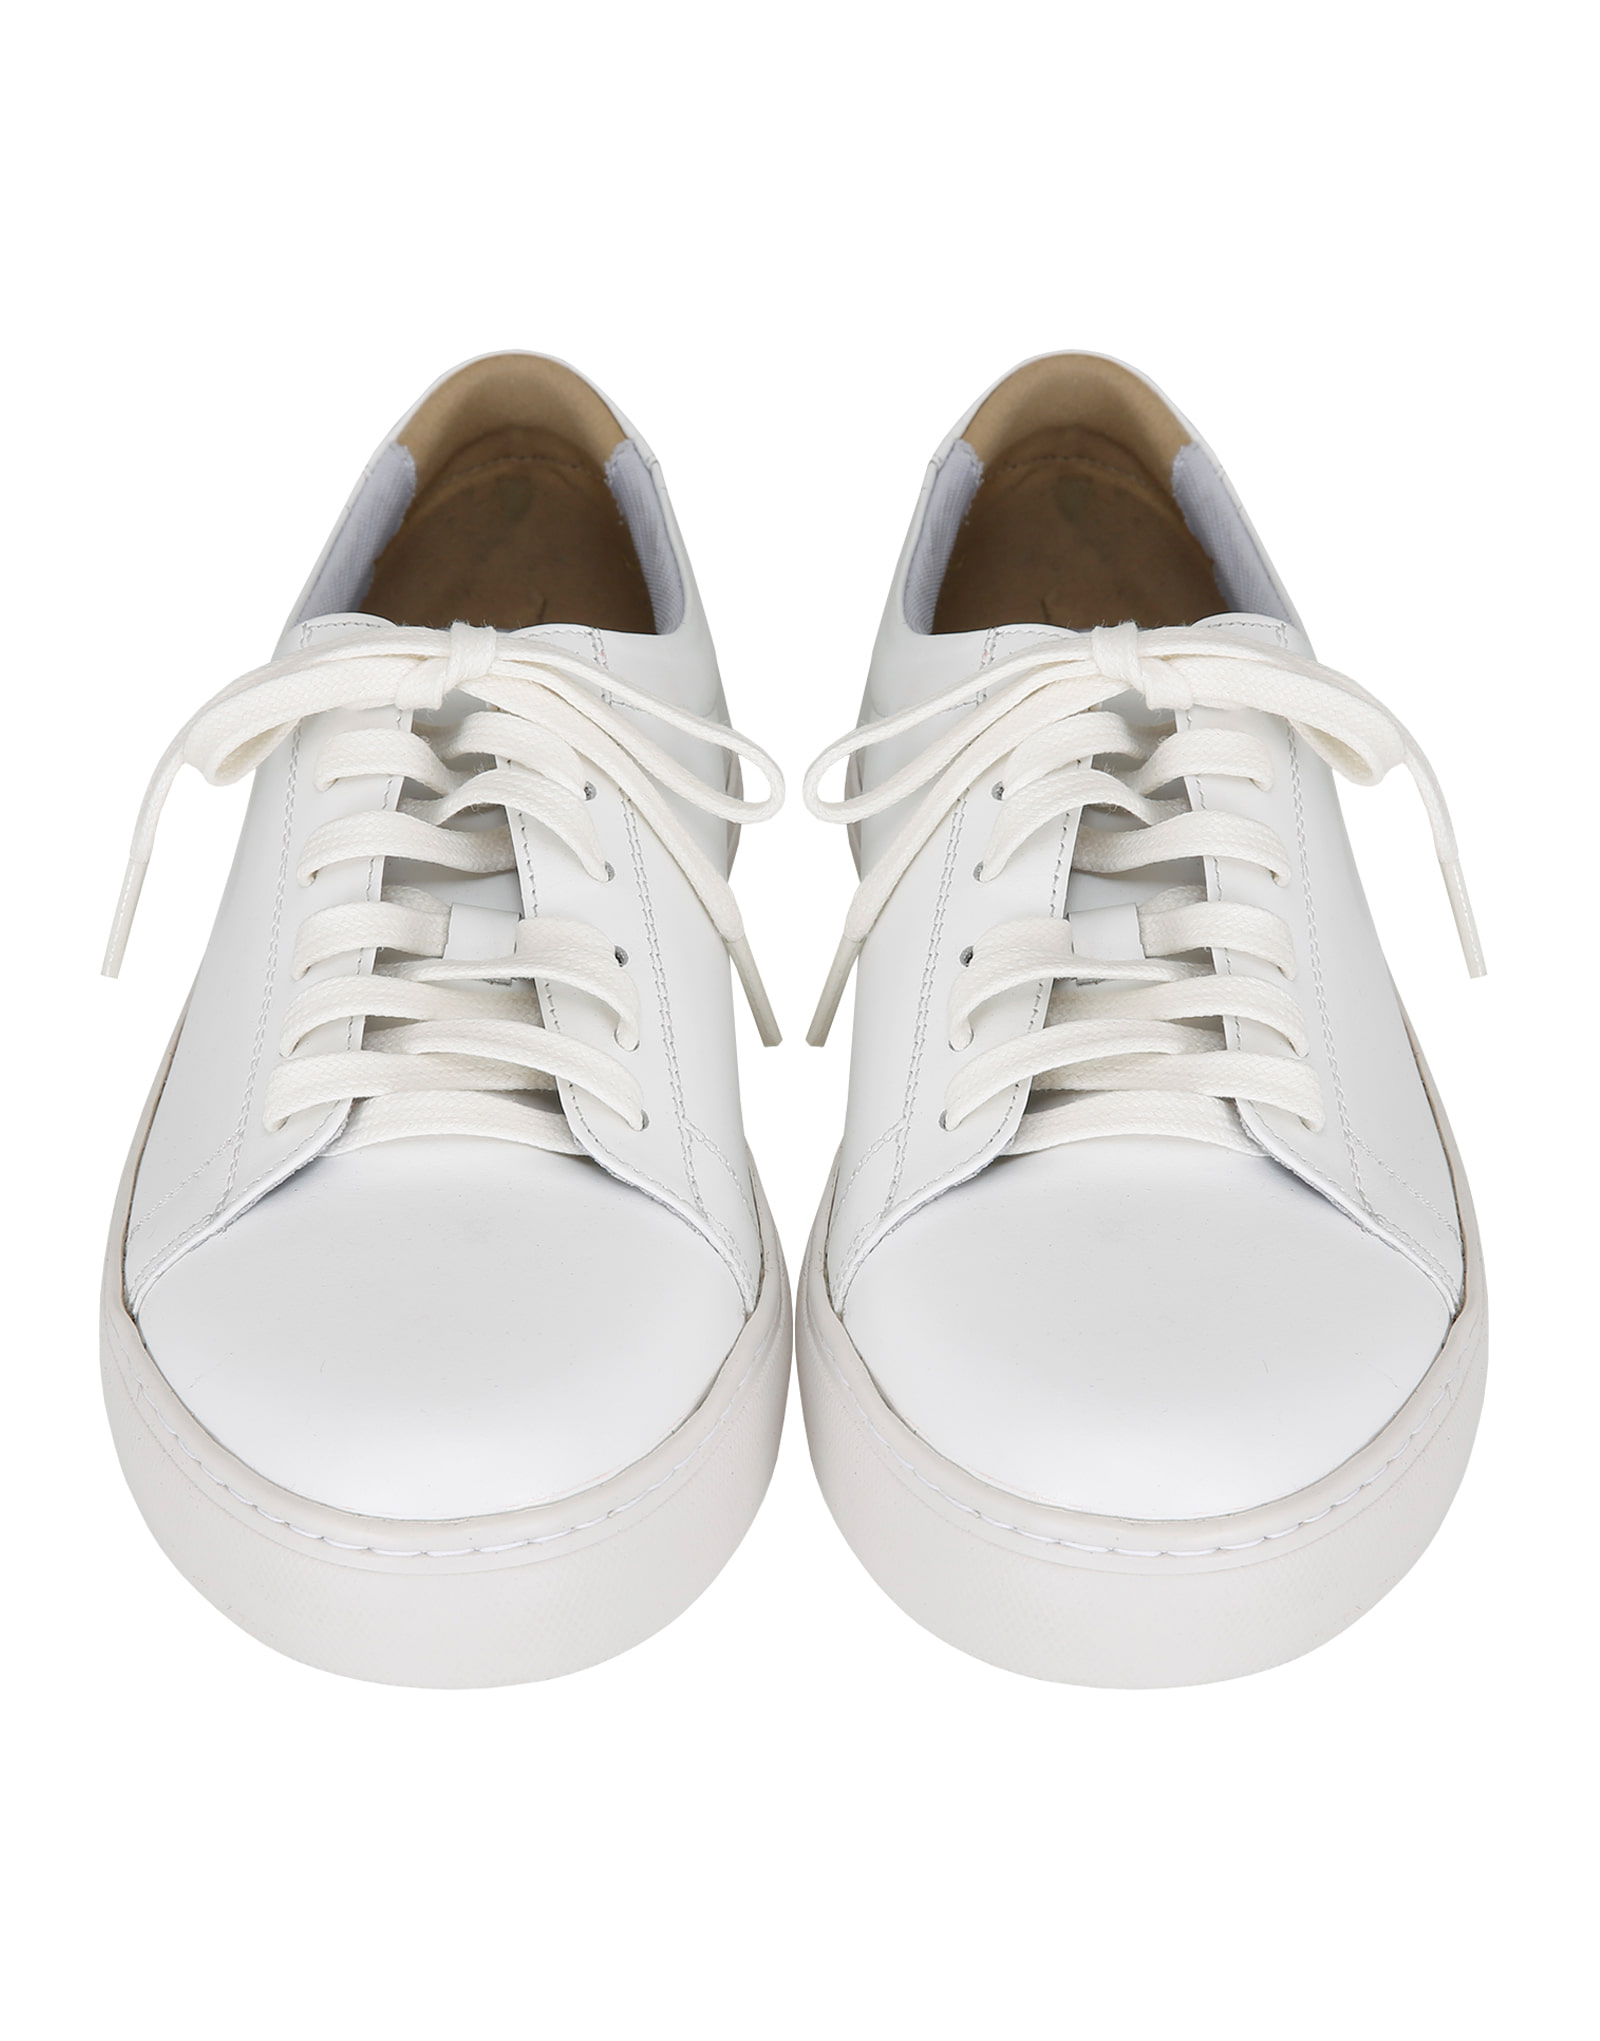 Chef Sneakers (Vibram) #AF2031 White